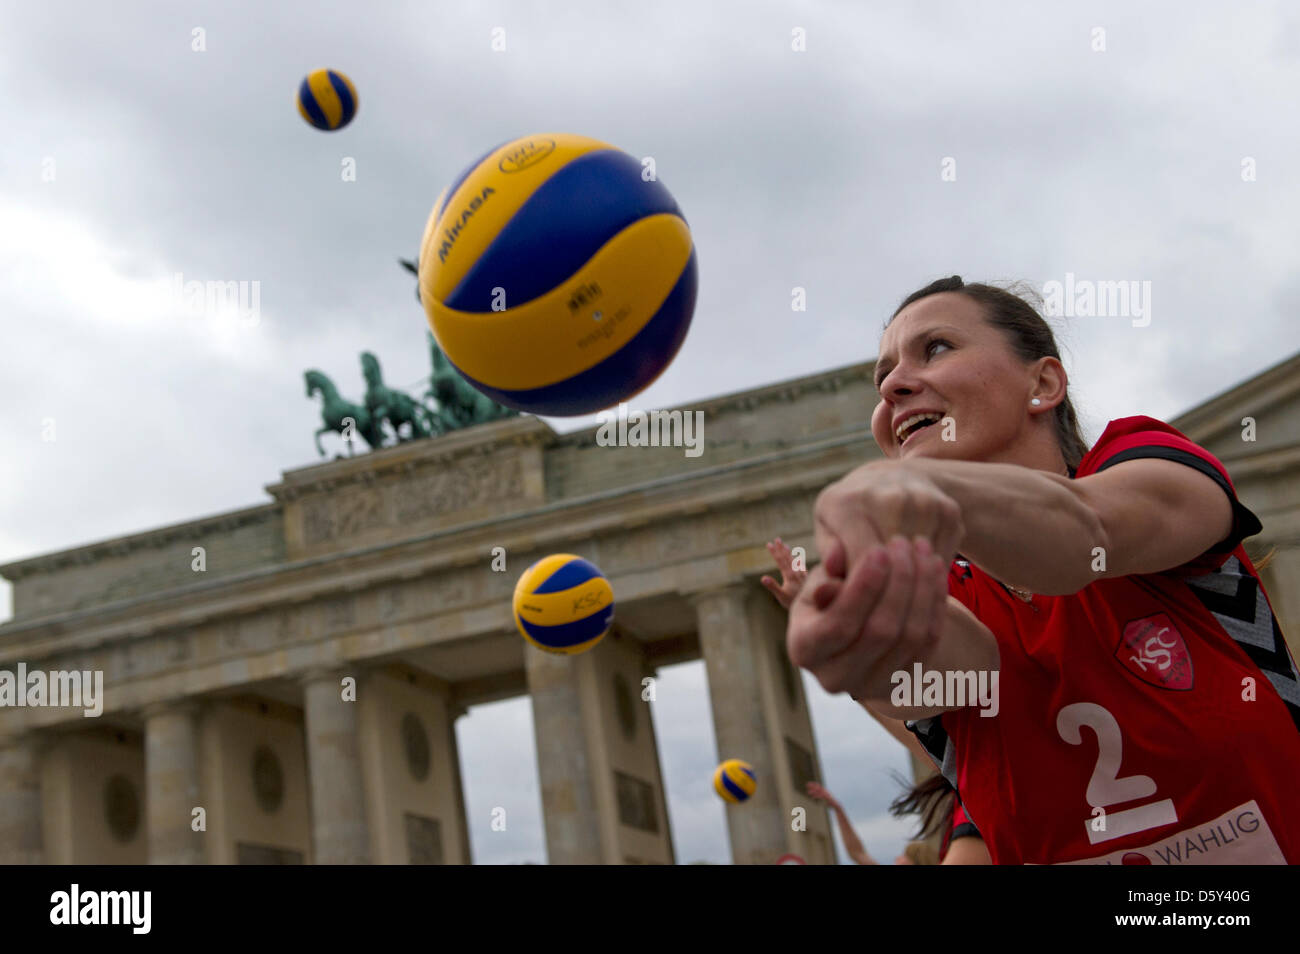 Women's vollyball player Ilona Droeger from Koepeniker Sportclub (KSC) takes part in a public training session in Berlin, Germany, 10 October 2012. They are starting the 2012/13 season with the training session. Photo: MARC TIRL Stock Photo